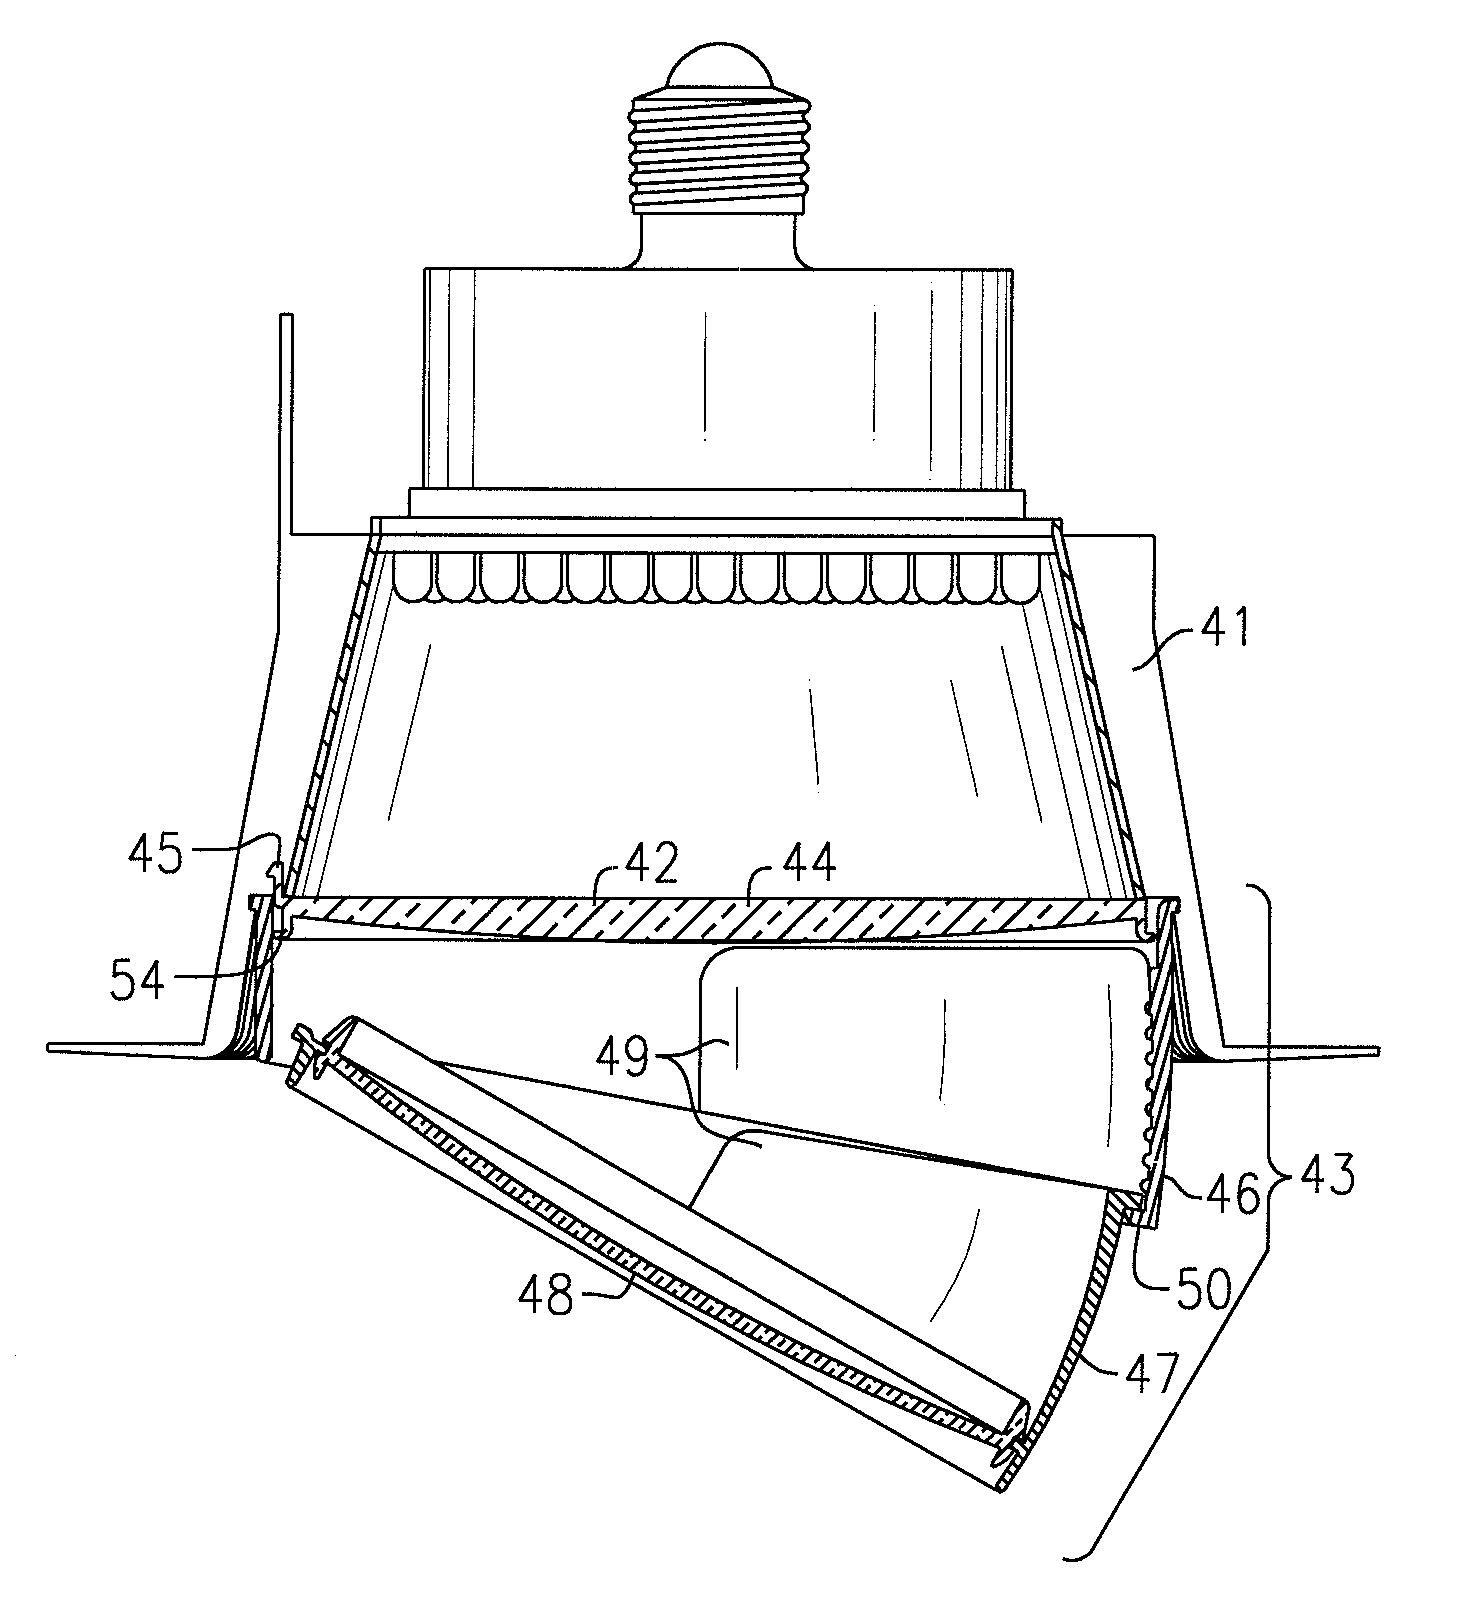 Light fixtures, lighting devices, and components for the same